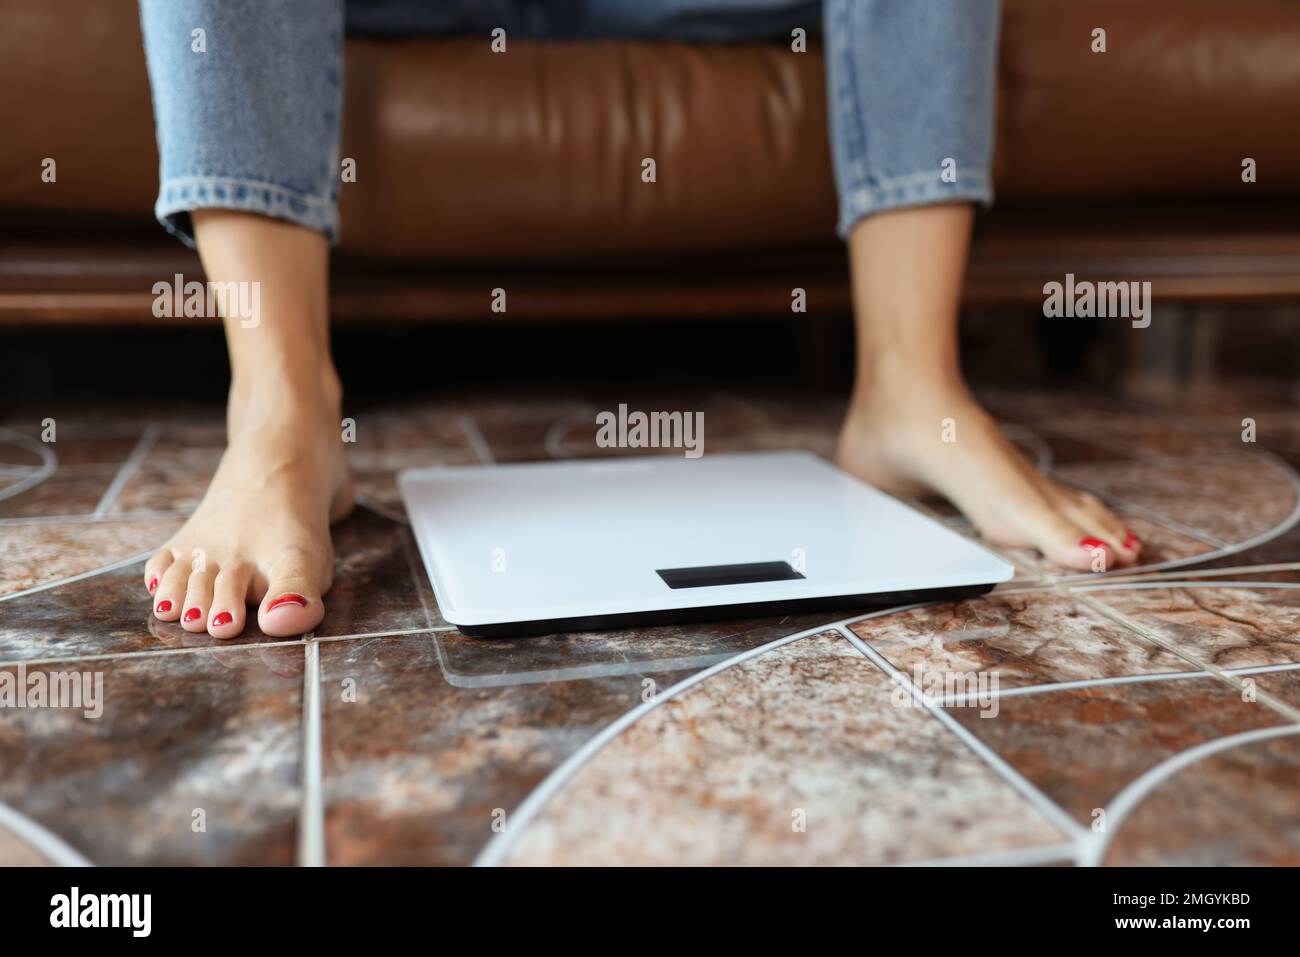 Women's legs and scales on the floor close-up. Stock Photo